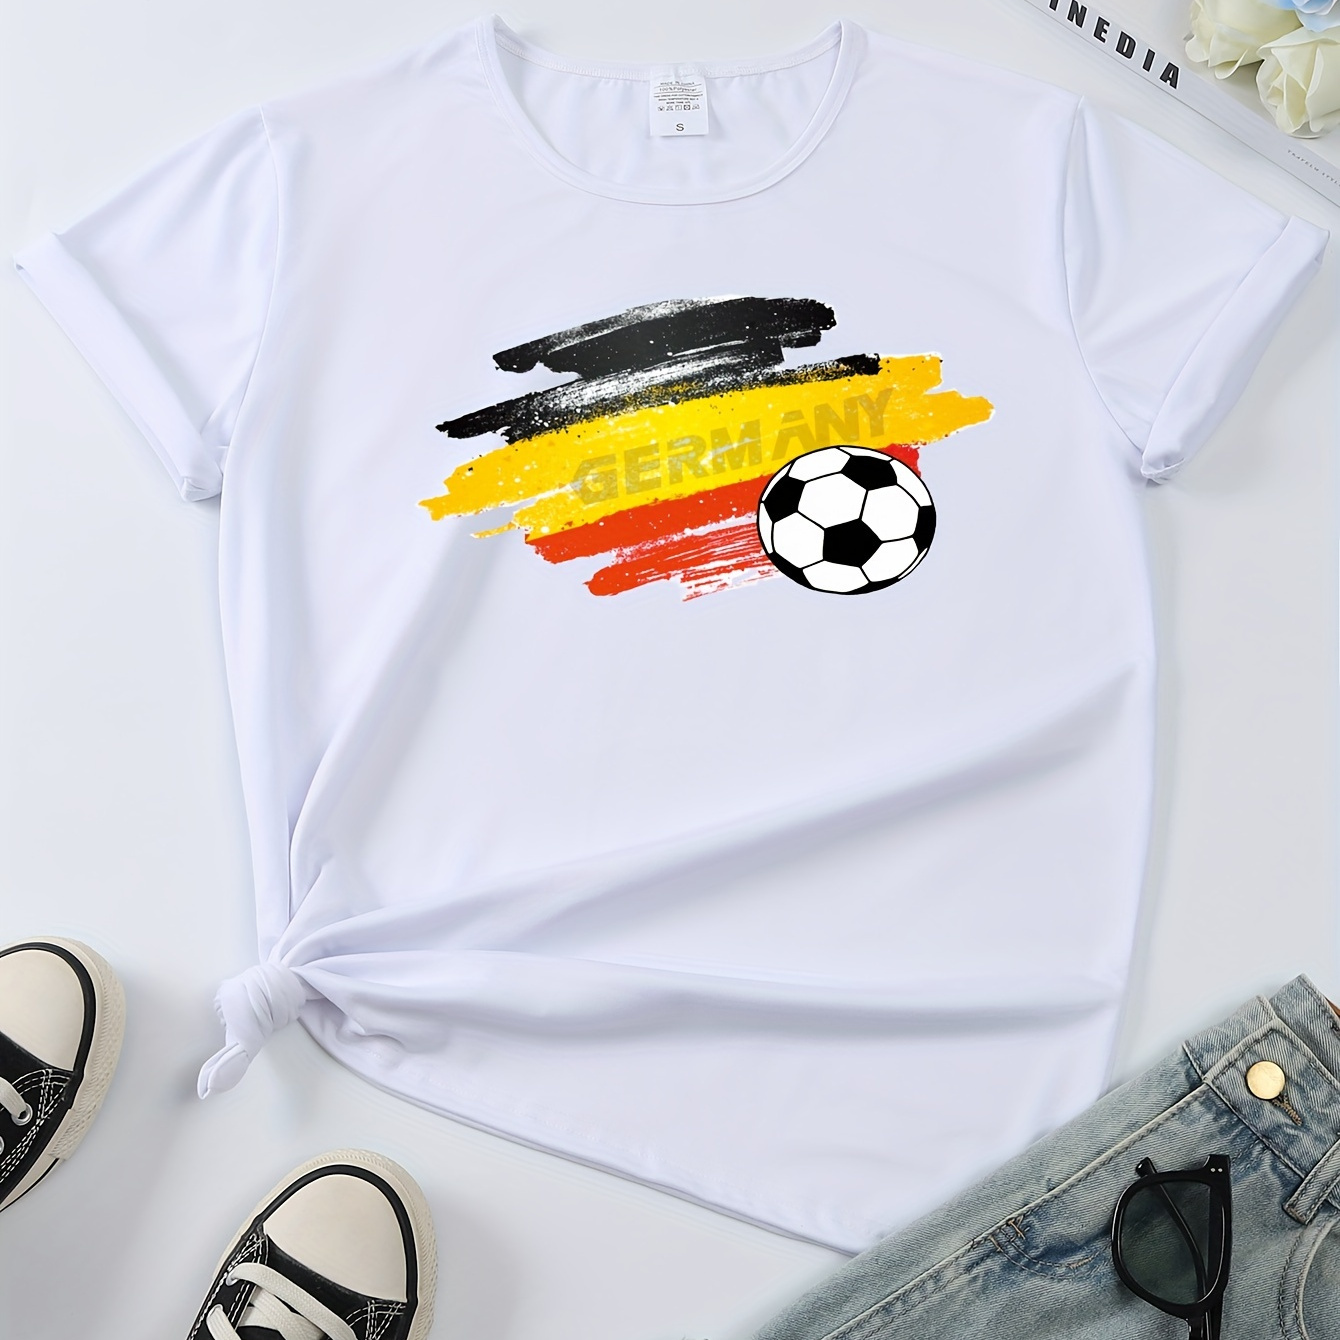 

Germany Soccer Print T-shirt, Casual Crew Neck Short Sleeve Top For Spring & Summer, Women's Clothing